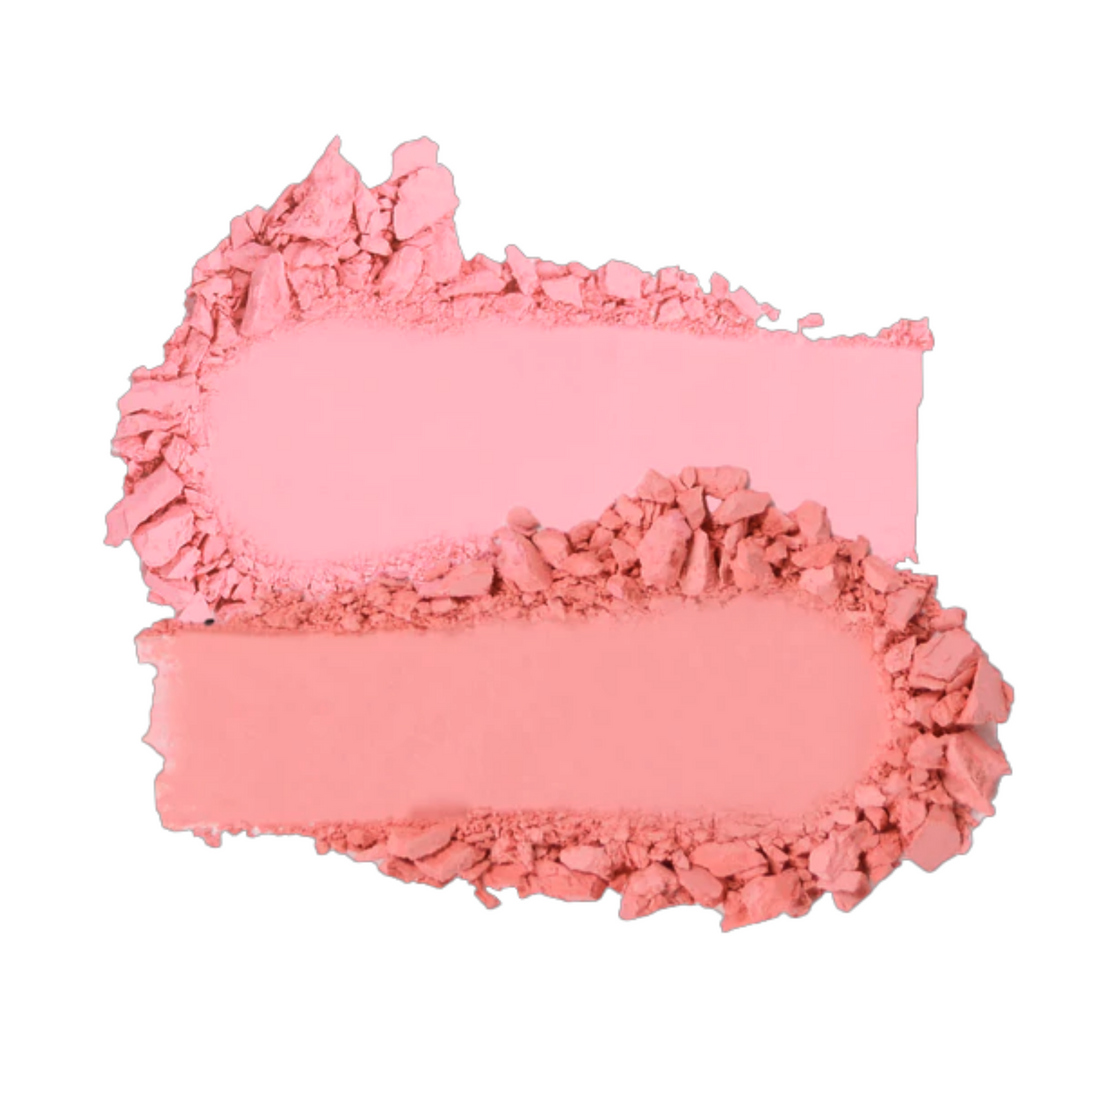 THAILOR COLLECTION: BLUSH DUO - 01 PINKY